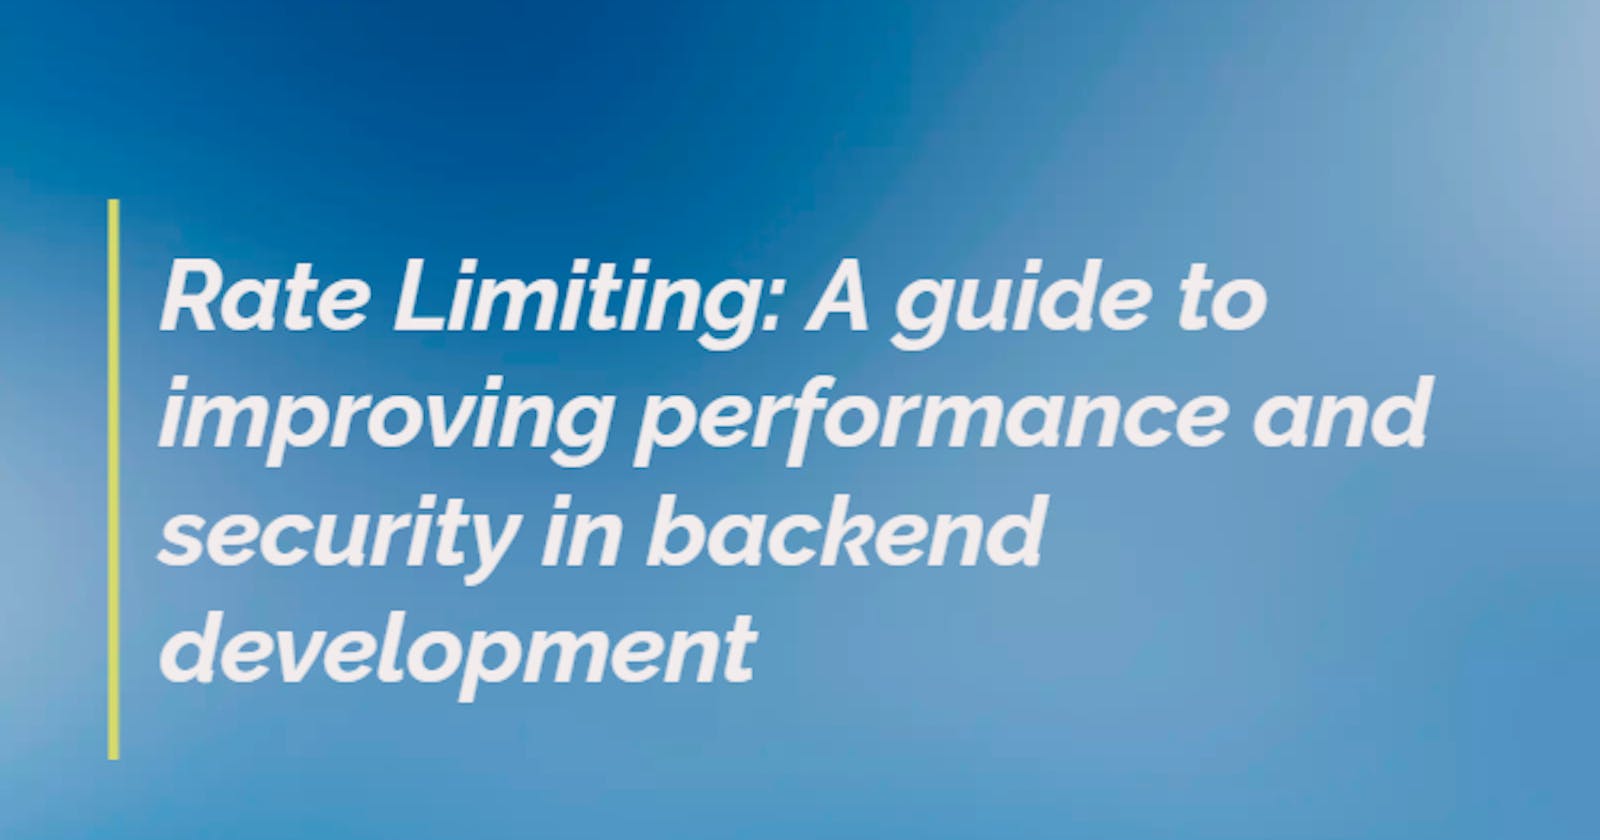 Rate Limiting: A guide to improving performance and security in backend development